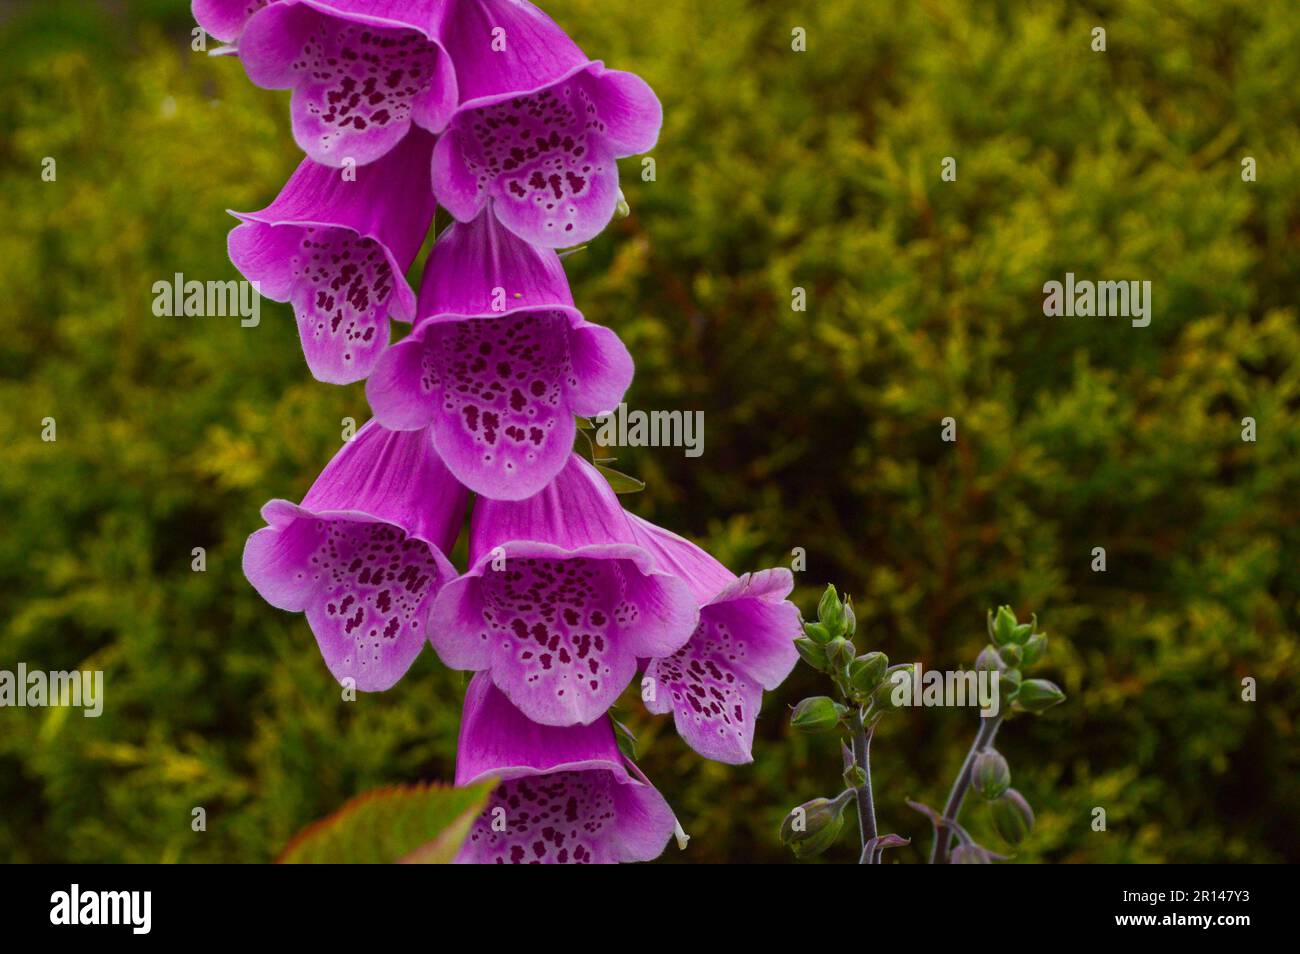 Digitalis purpurea, common foxglove is a short-lived perennial plant. The leaves are spirally arranged. Stock Photo